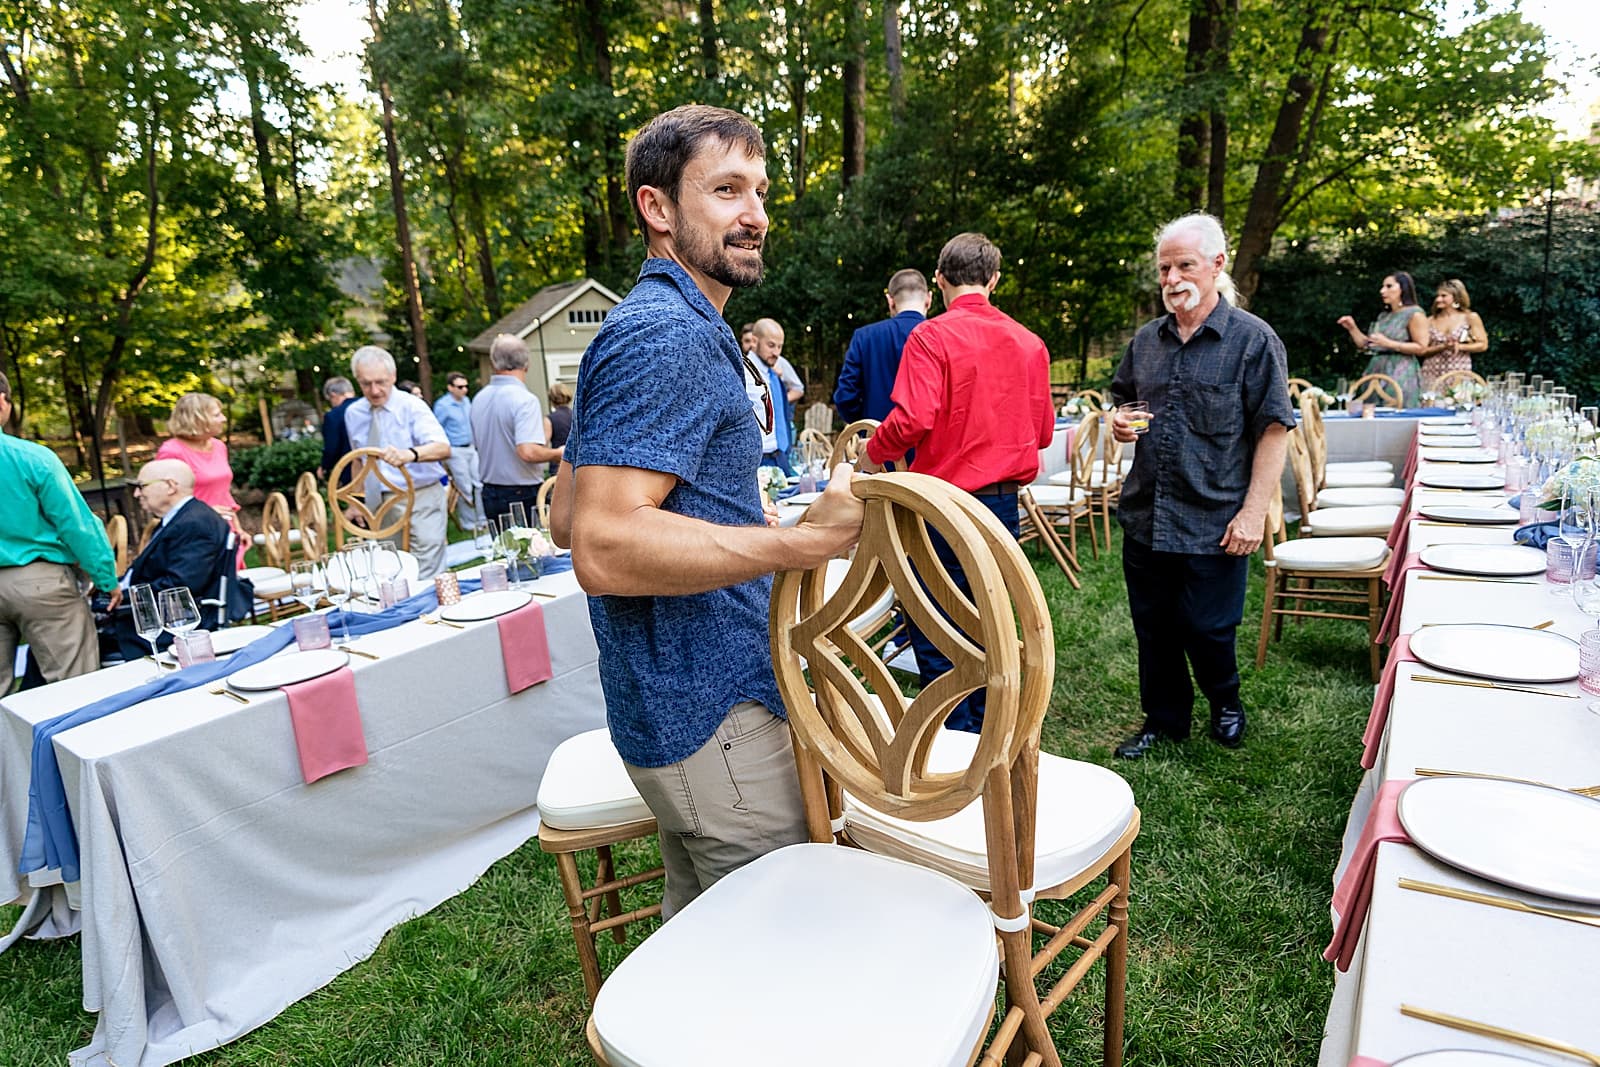 Don't be afraid to put your friends to work at your DIY wedding in the backyard